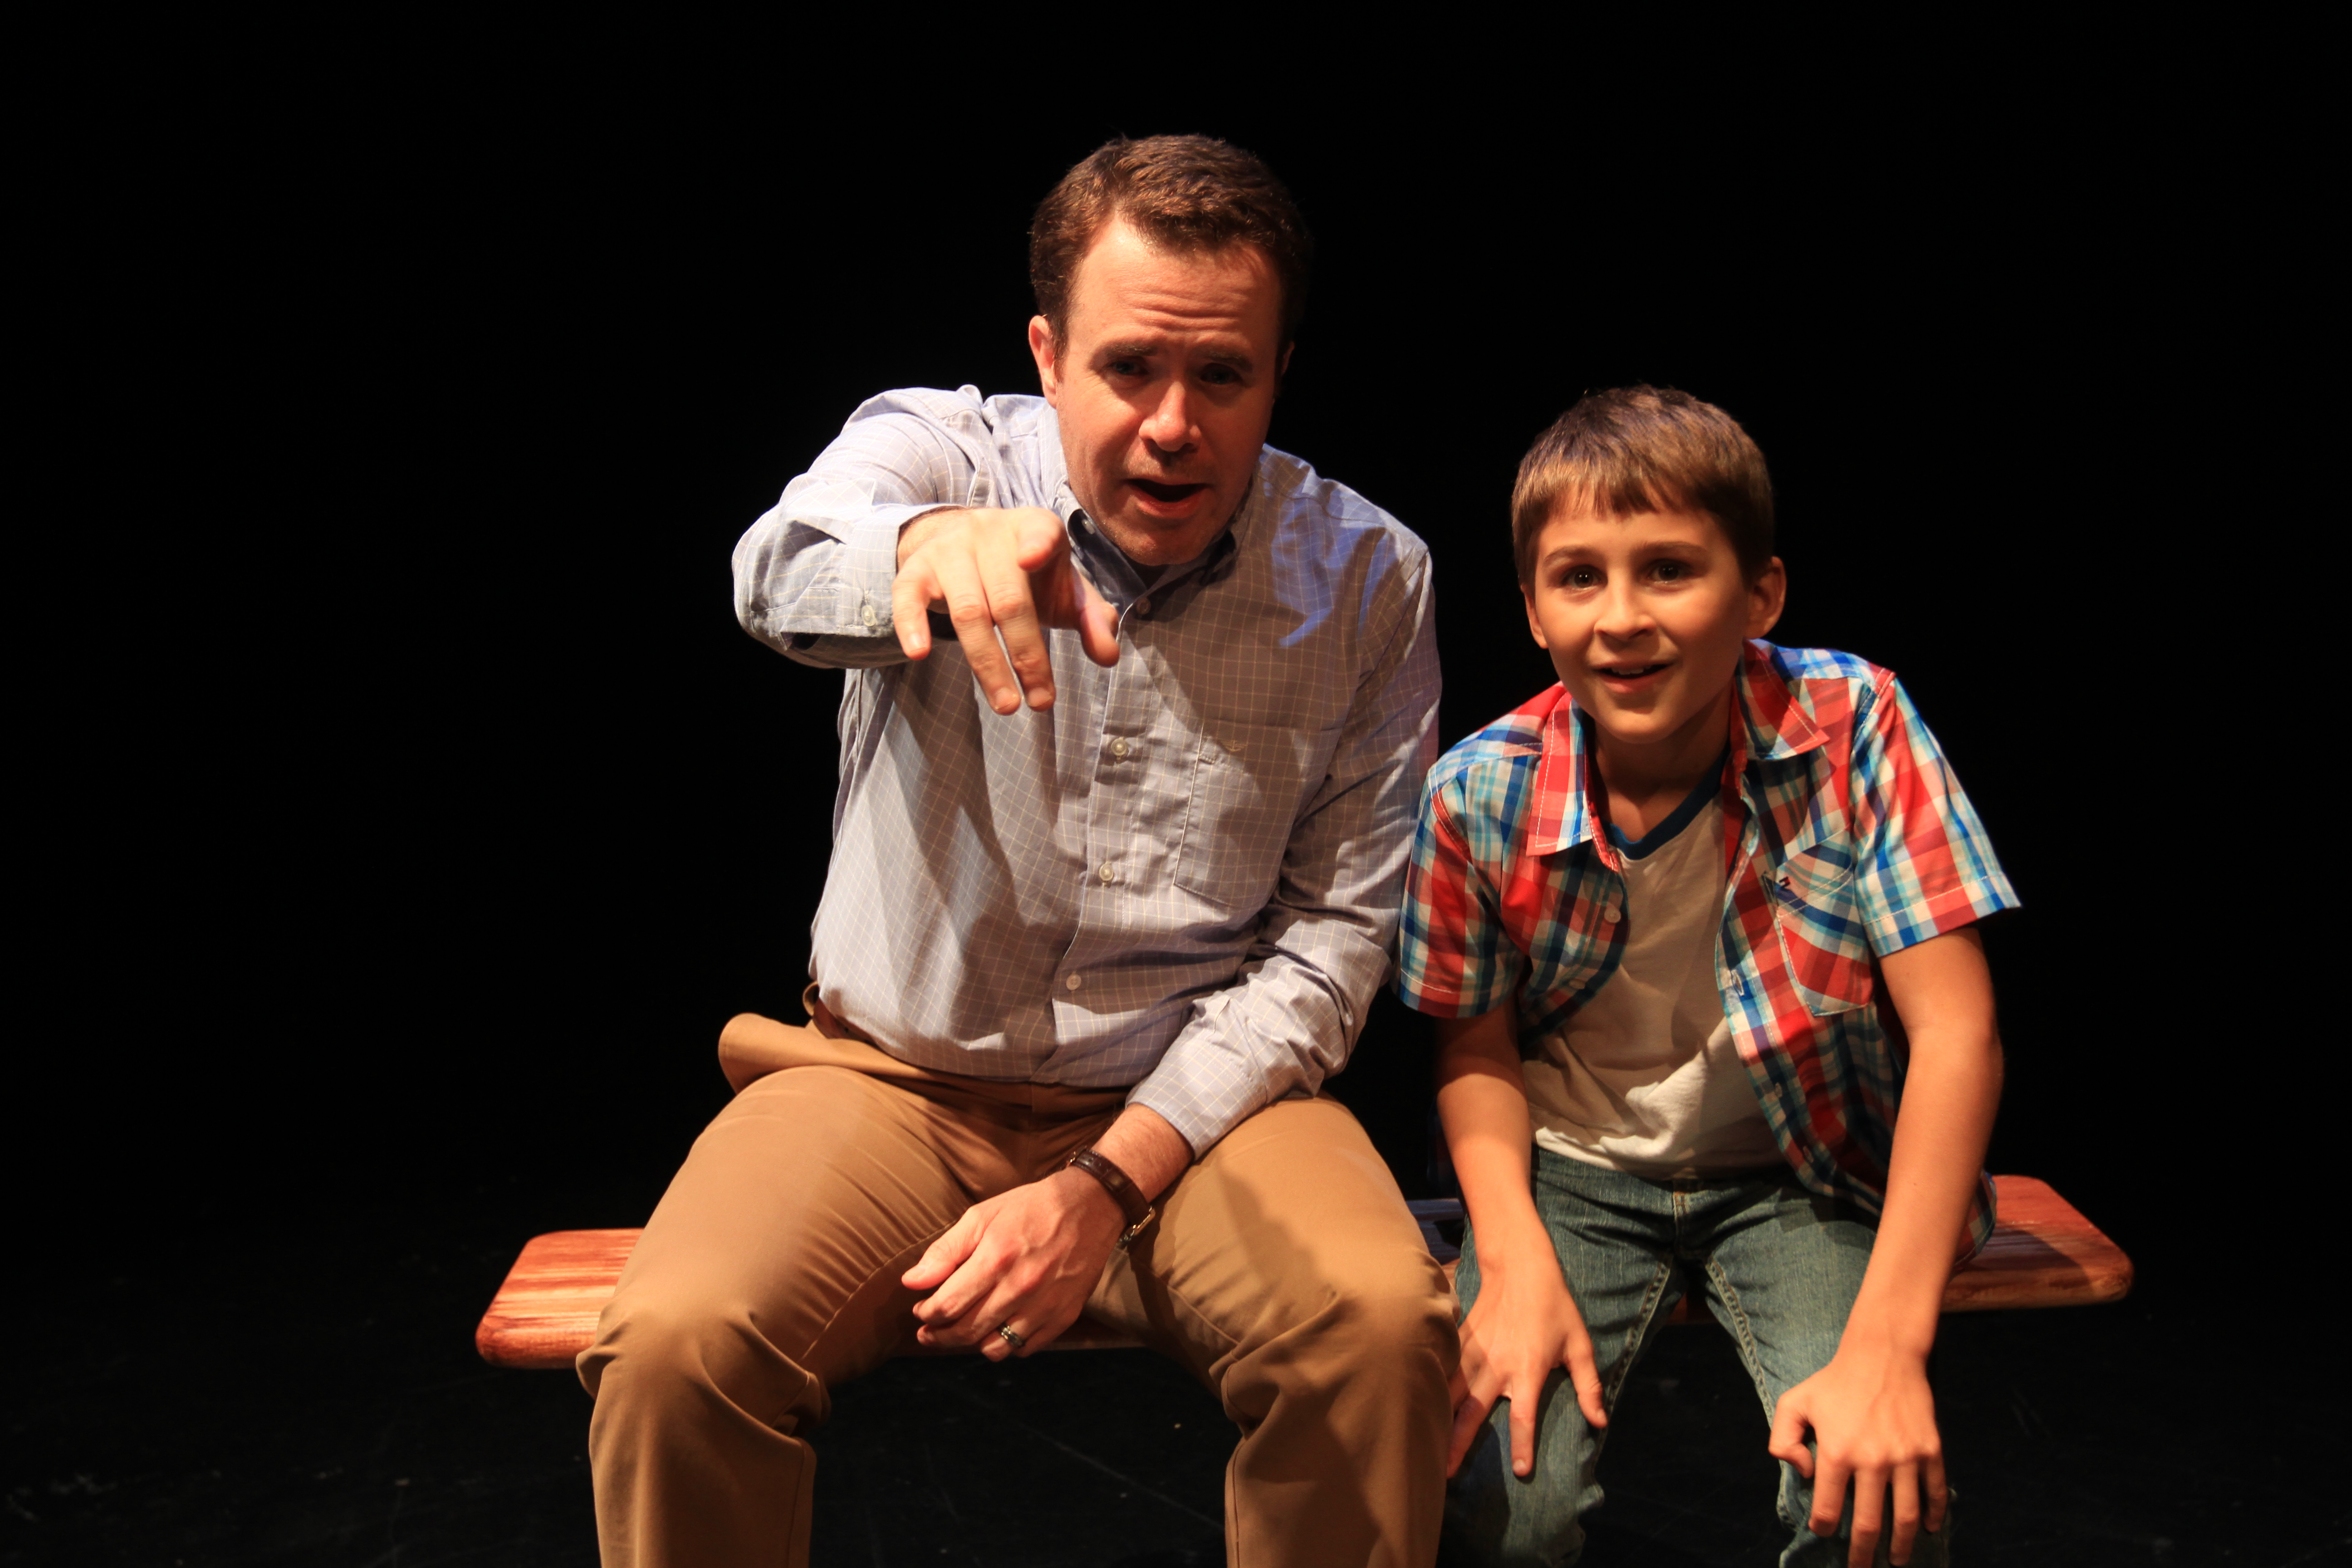 Young Ray Didinger (Simon Canuso Kiley) and older version of himself (Matt Pfeiffer) walk down memory lane in TOMMY & ME. Photo by Paola Nogueras.